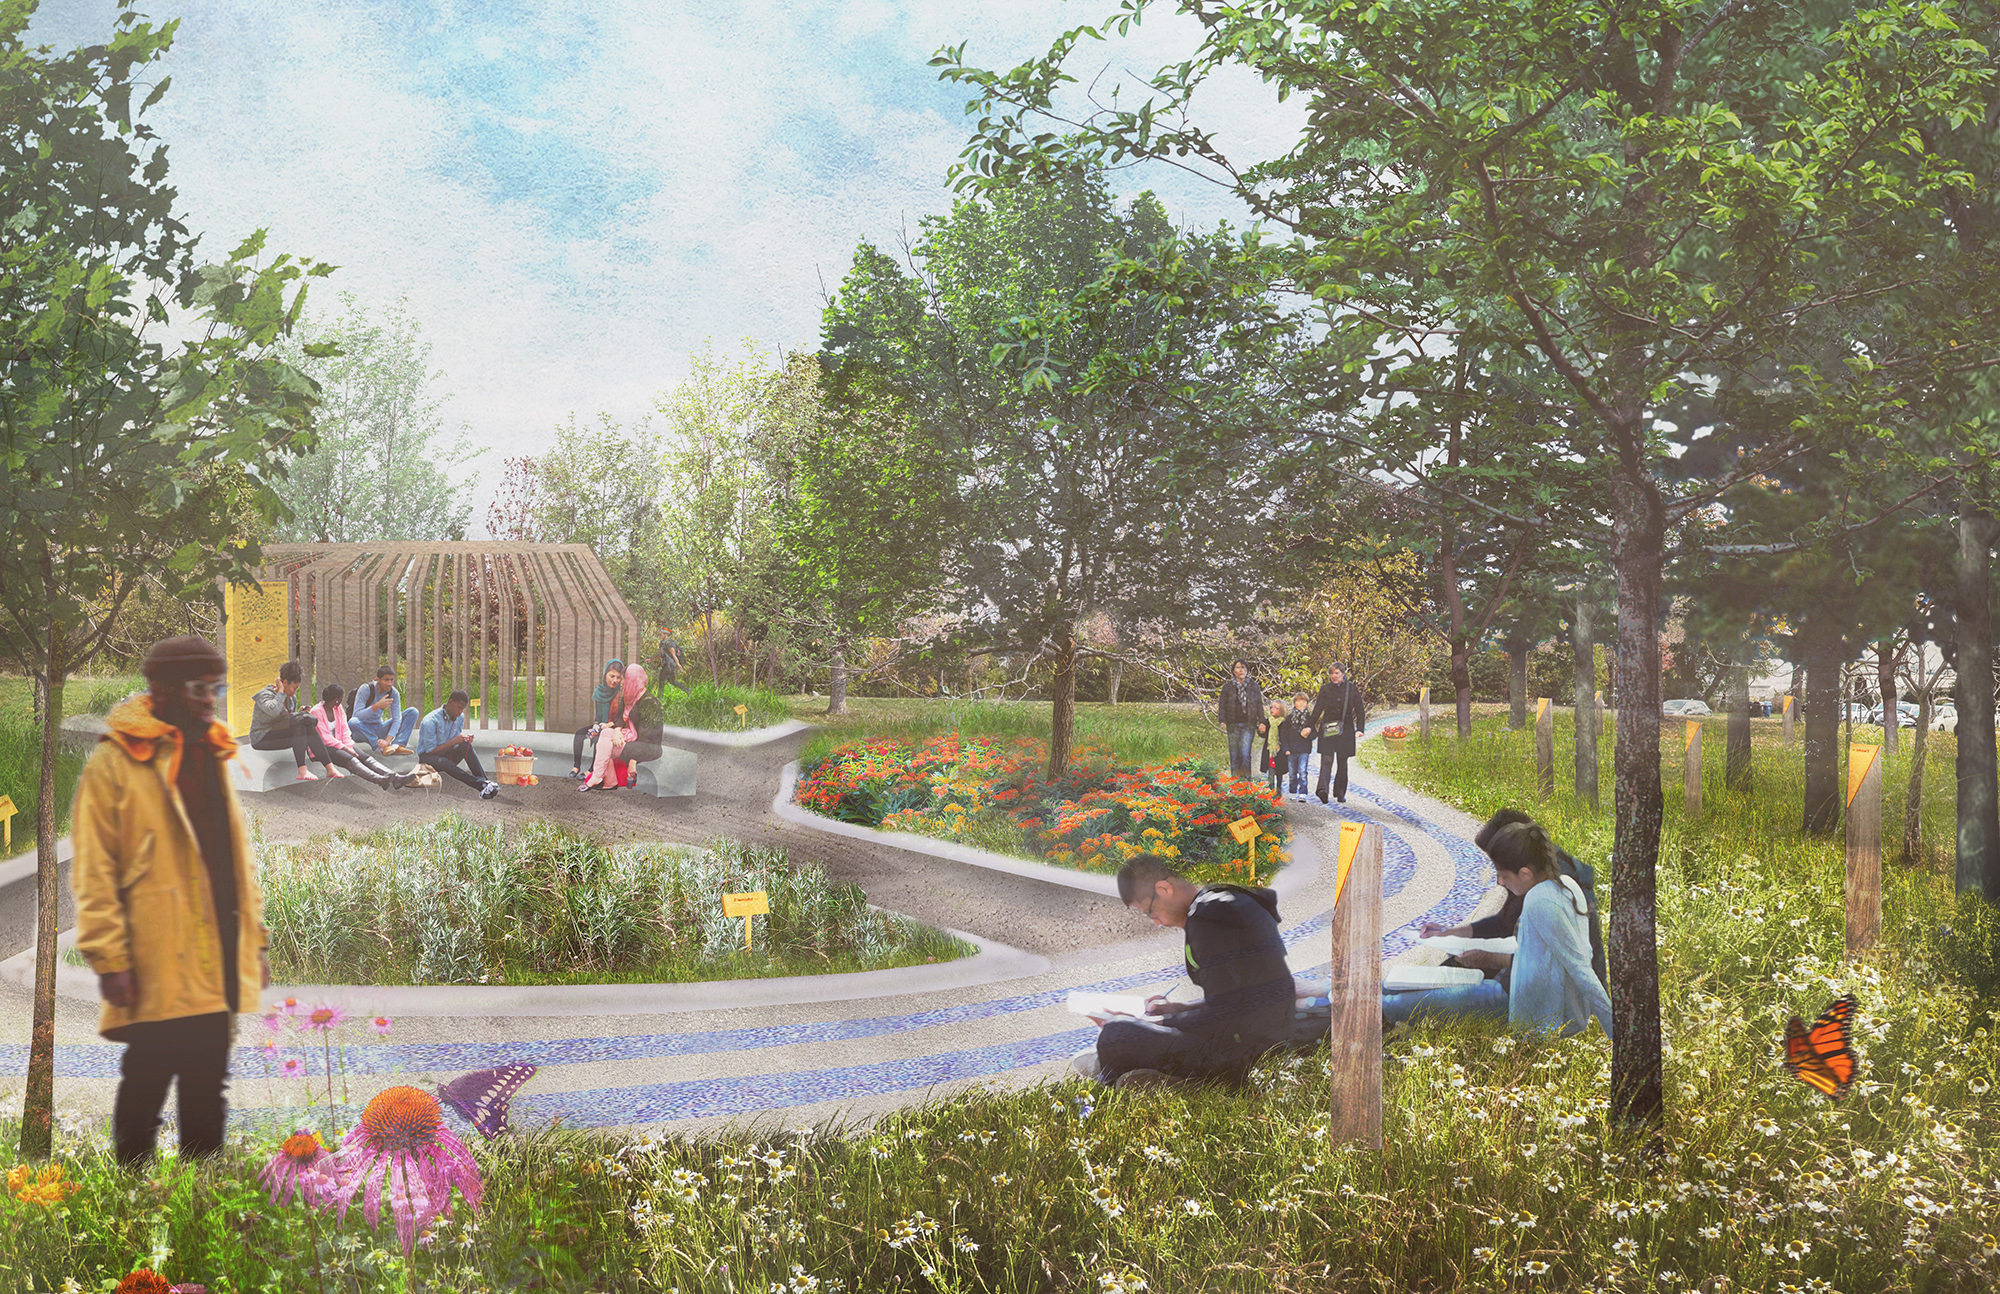 This view demonstrates what the Indigenous medicine garden and arboretum could look like. included in the image are a shelter in the centre of the medicine garden, hard surface paths, and tree markers.